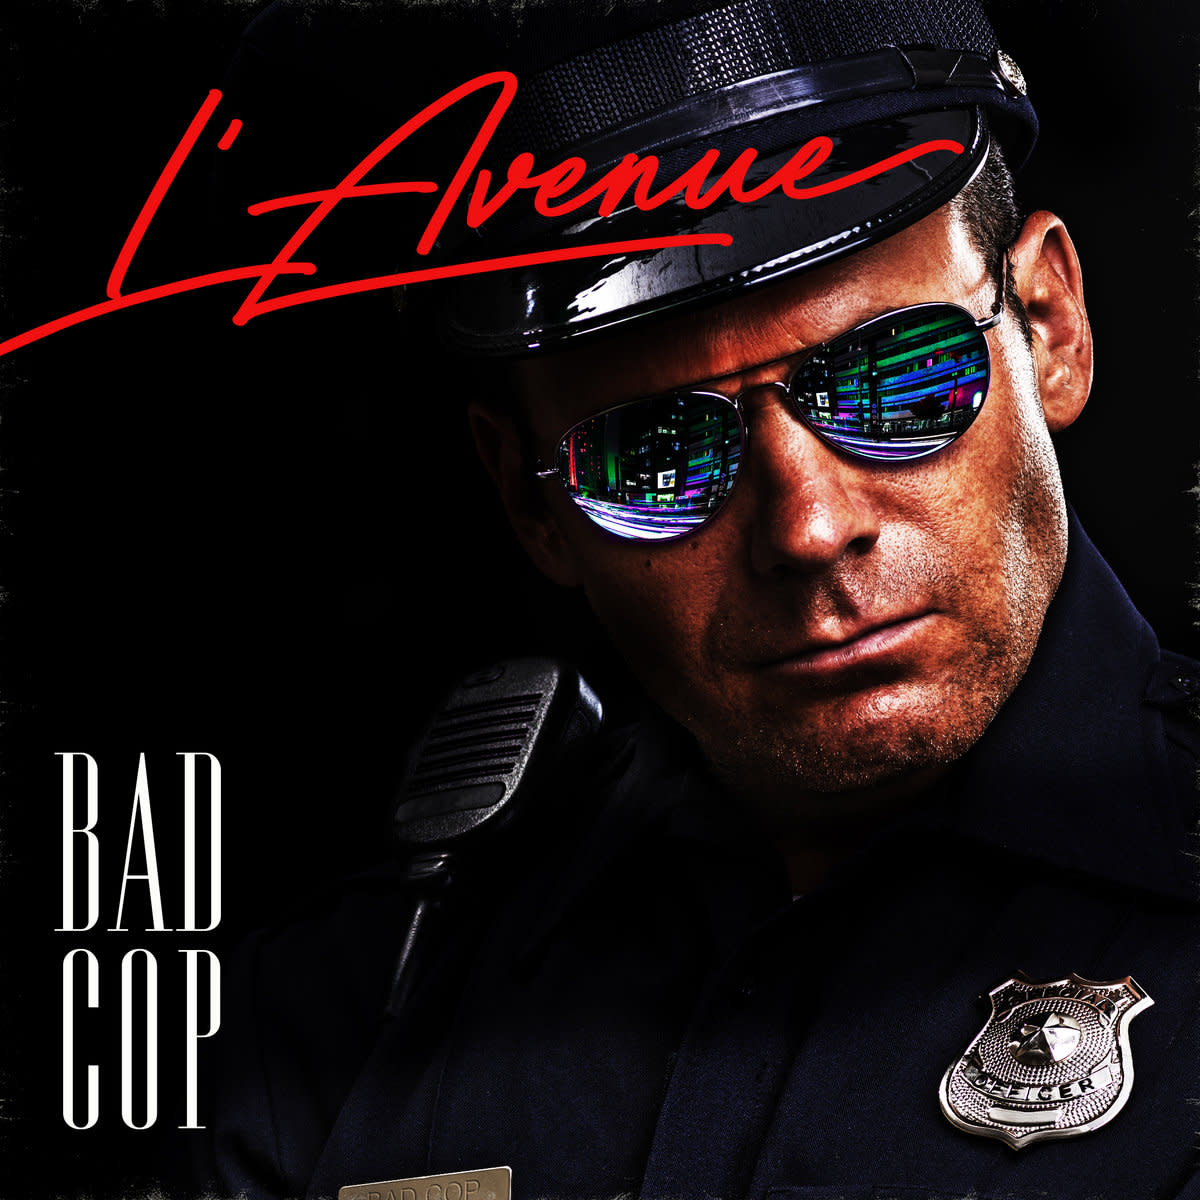 synth-single-review-bad-cop-by-lavenue